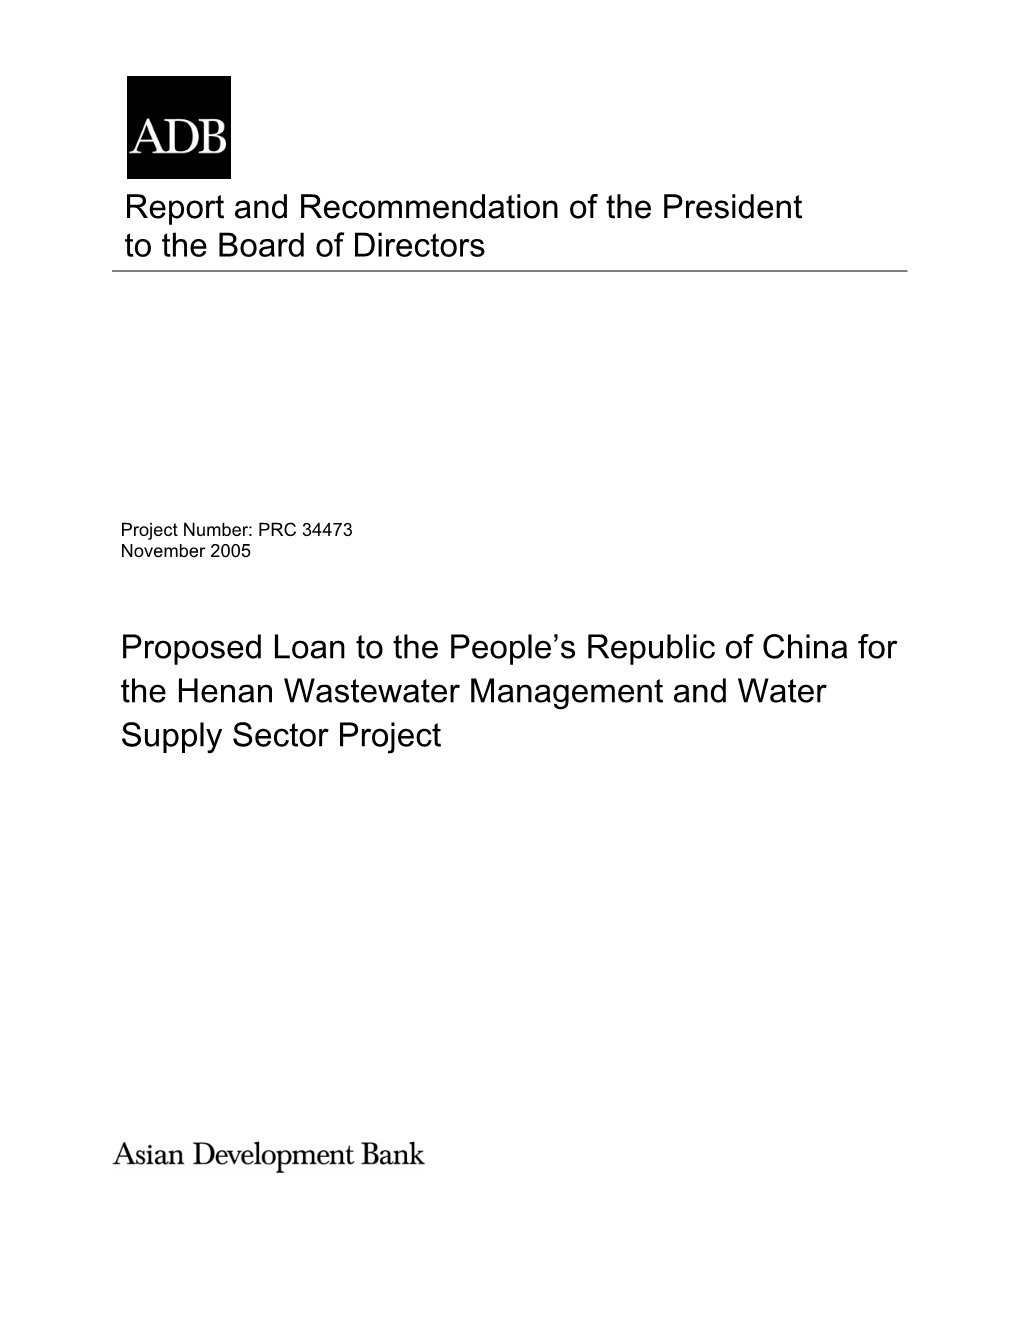 Proposed Loan to the People's Republic of China for the Henan